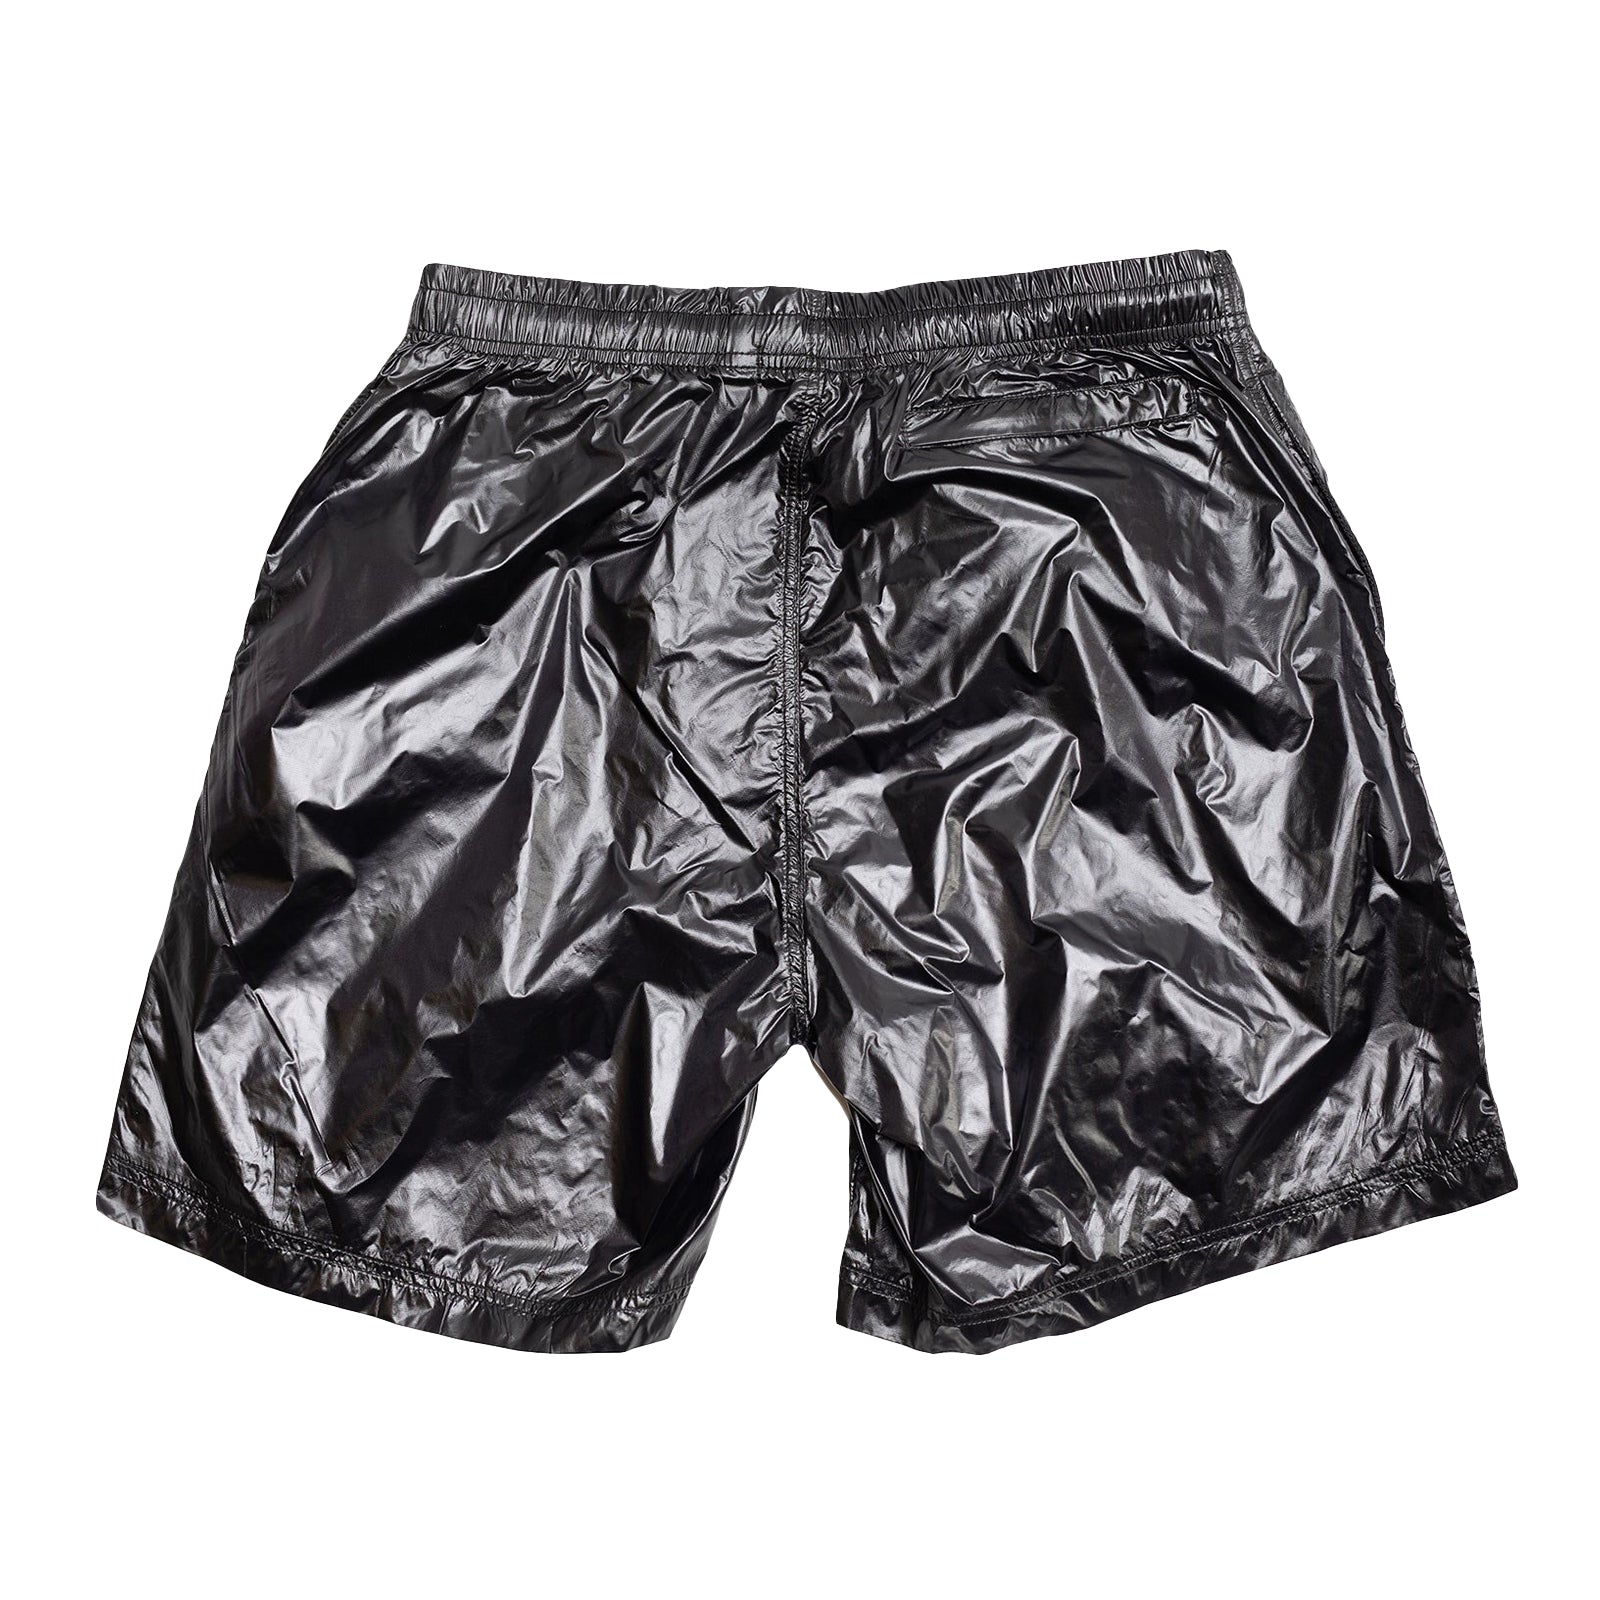 Raised By Wolves Ultralight Ripstop Shorts Black - SHORTS - Canada